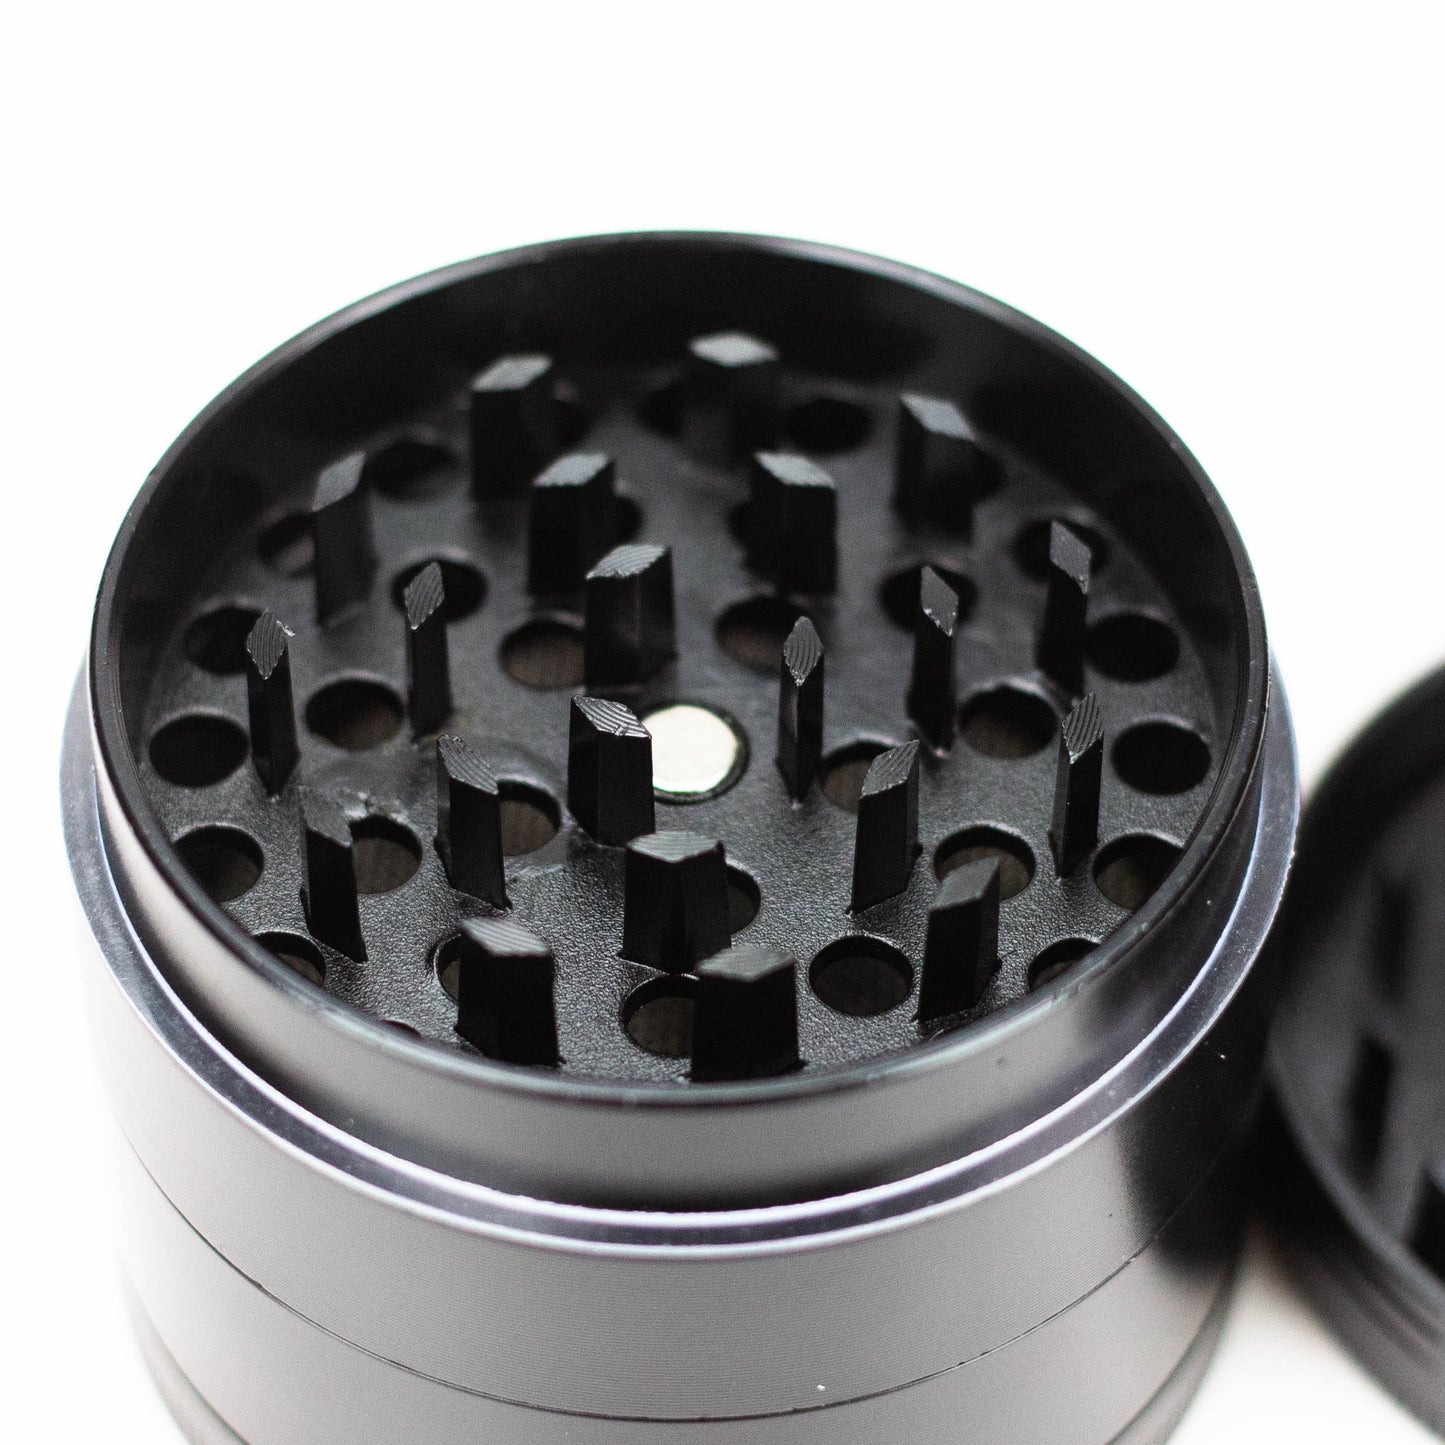 PROTECT YA NECK - 4 parts metal red grinder by Infyniti_6